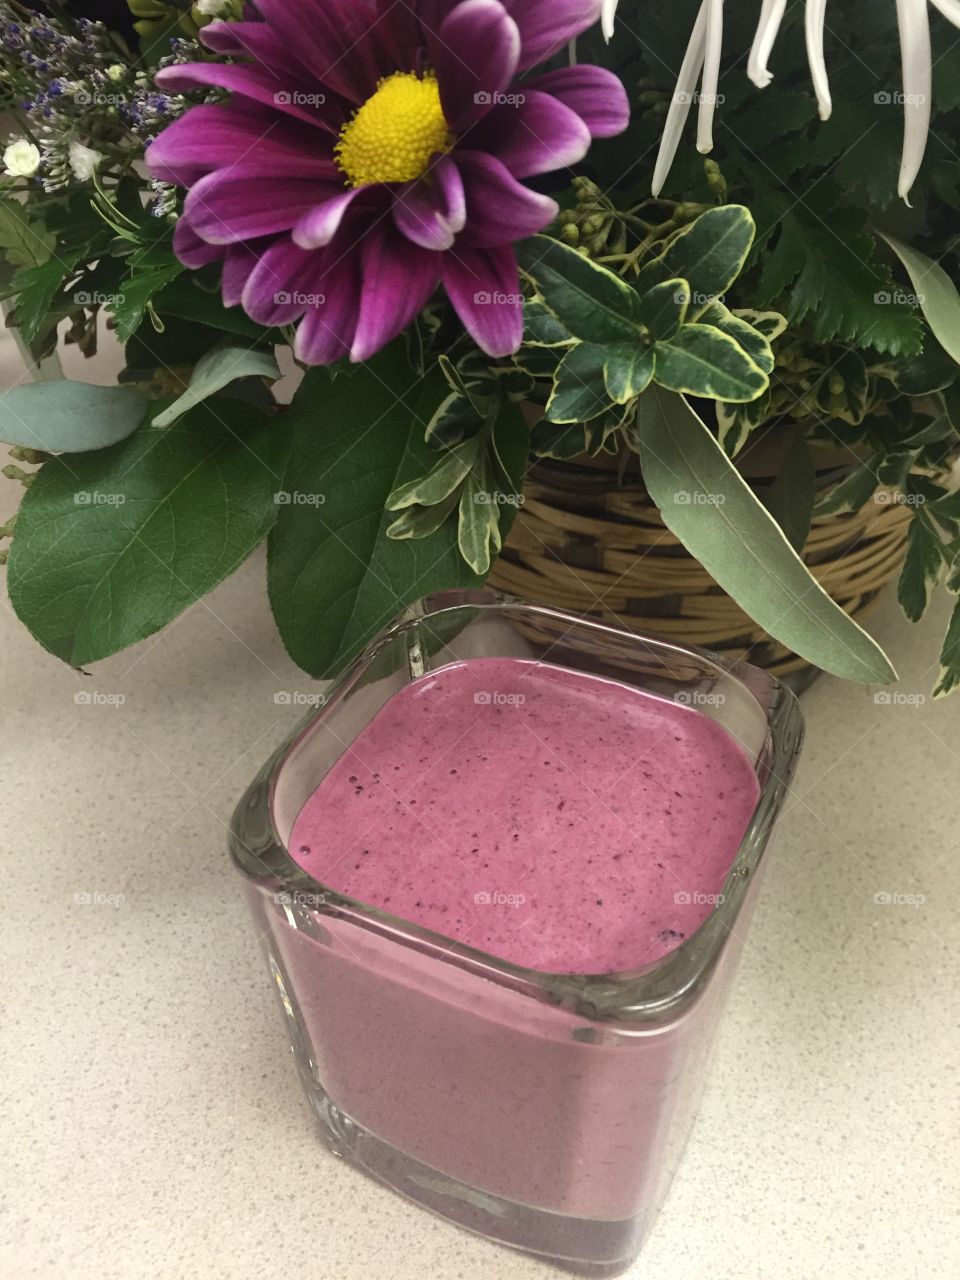 Smoothie purple with flowers